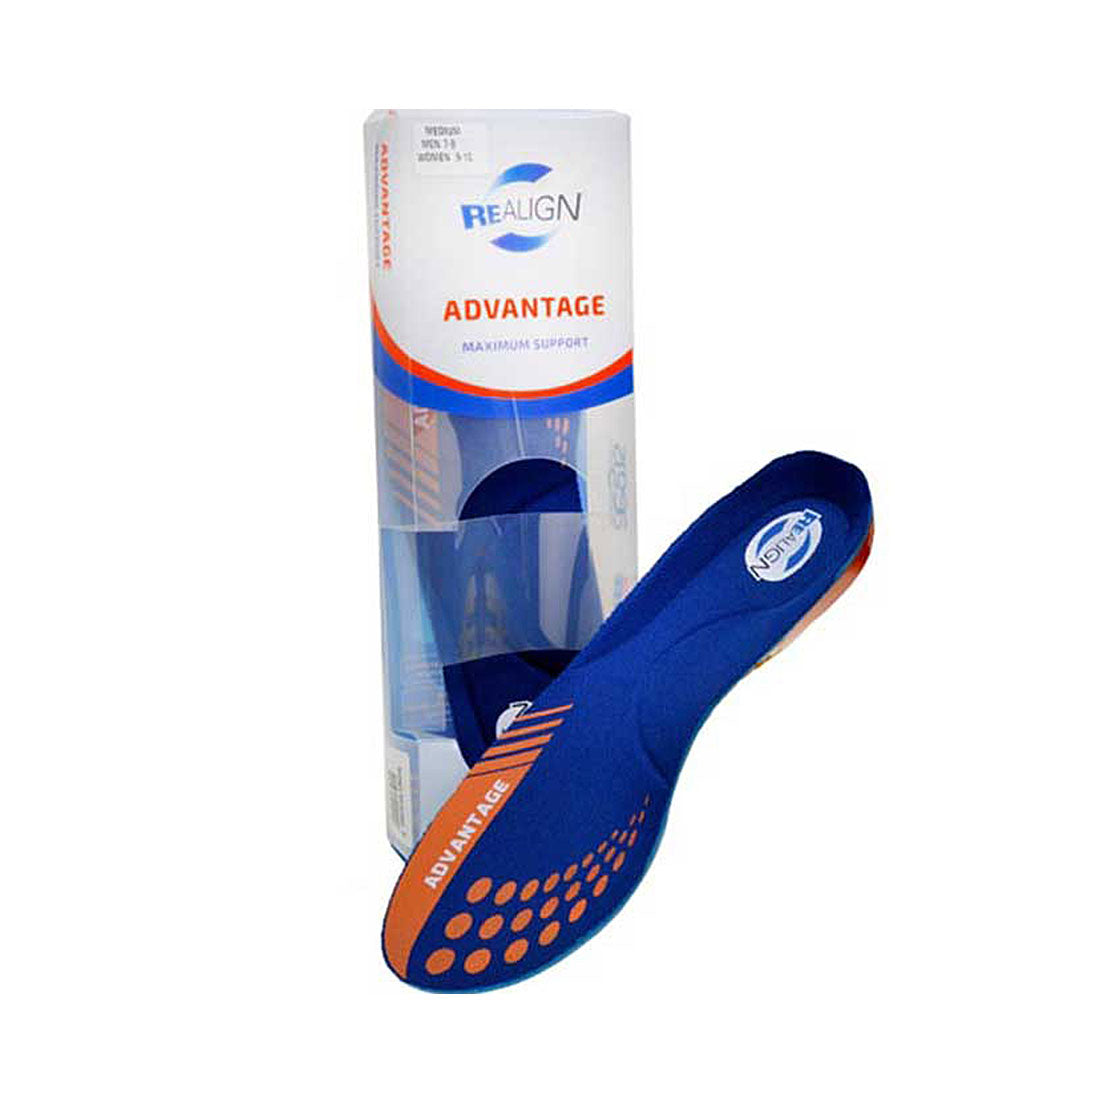 Realign Advantage Innersole Insoles and Fitting Aids